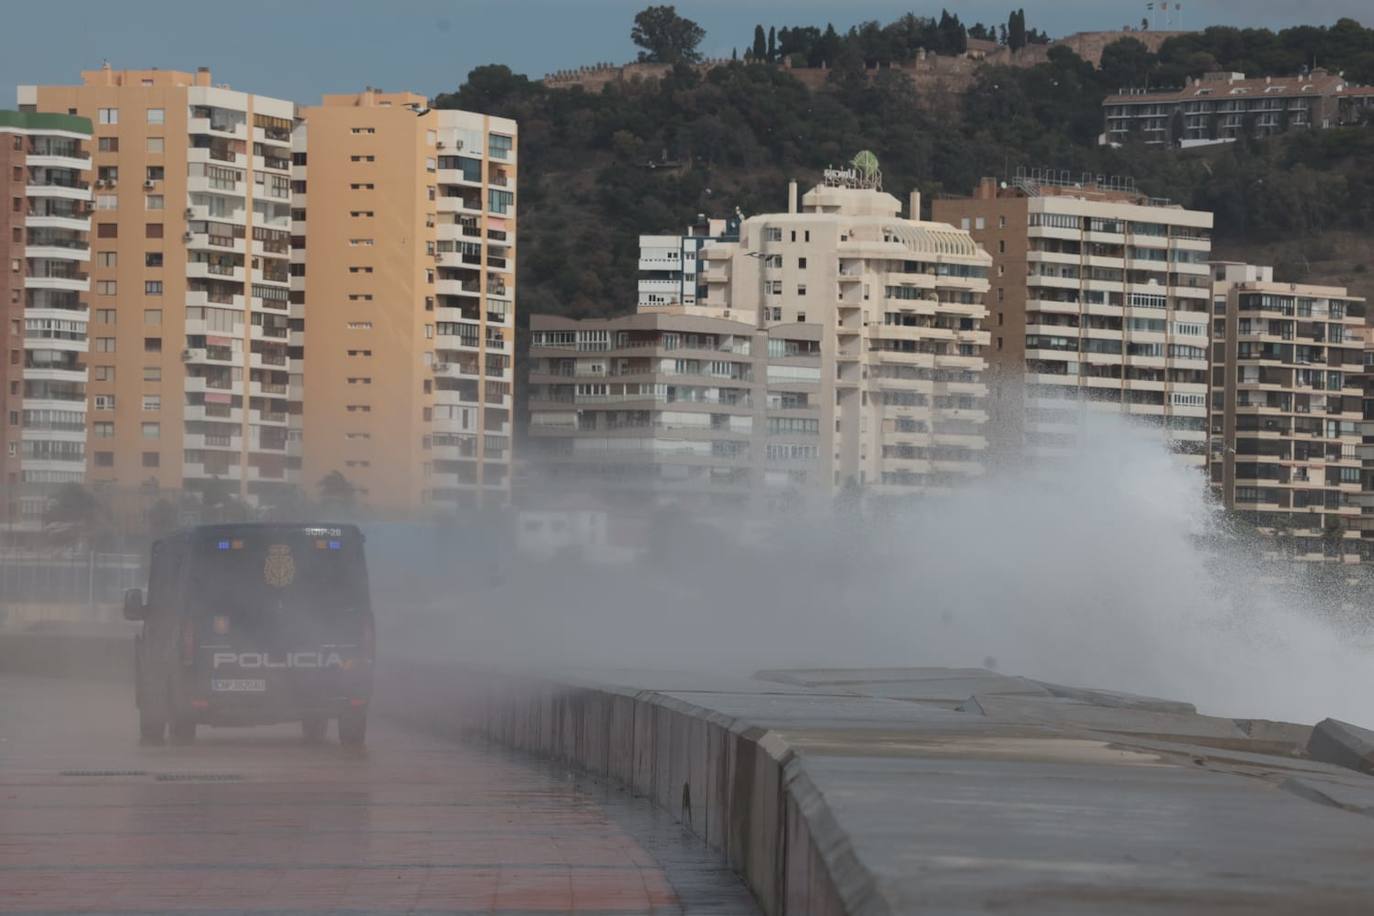 Malaga city recorded the largest volume of incidents in the province